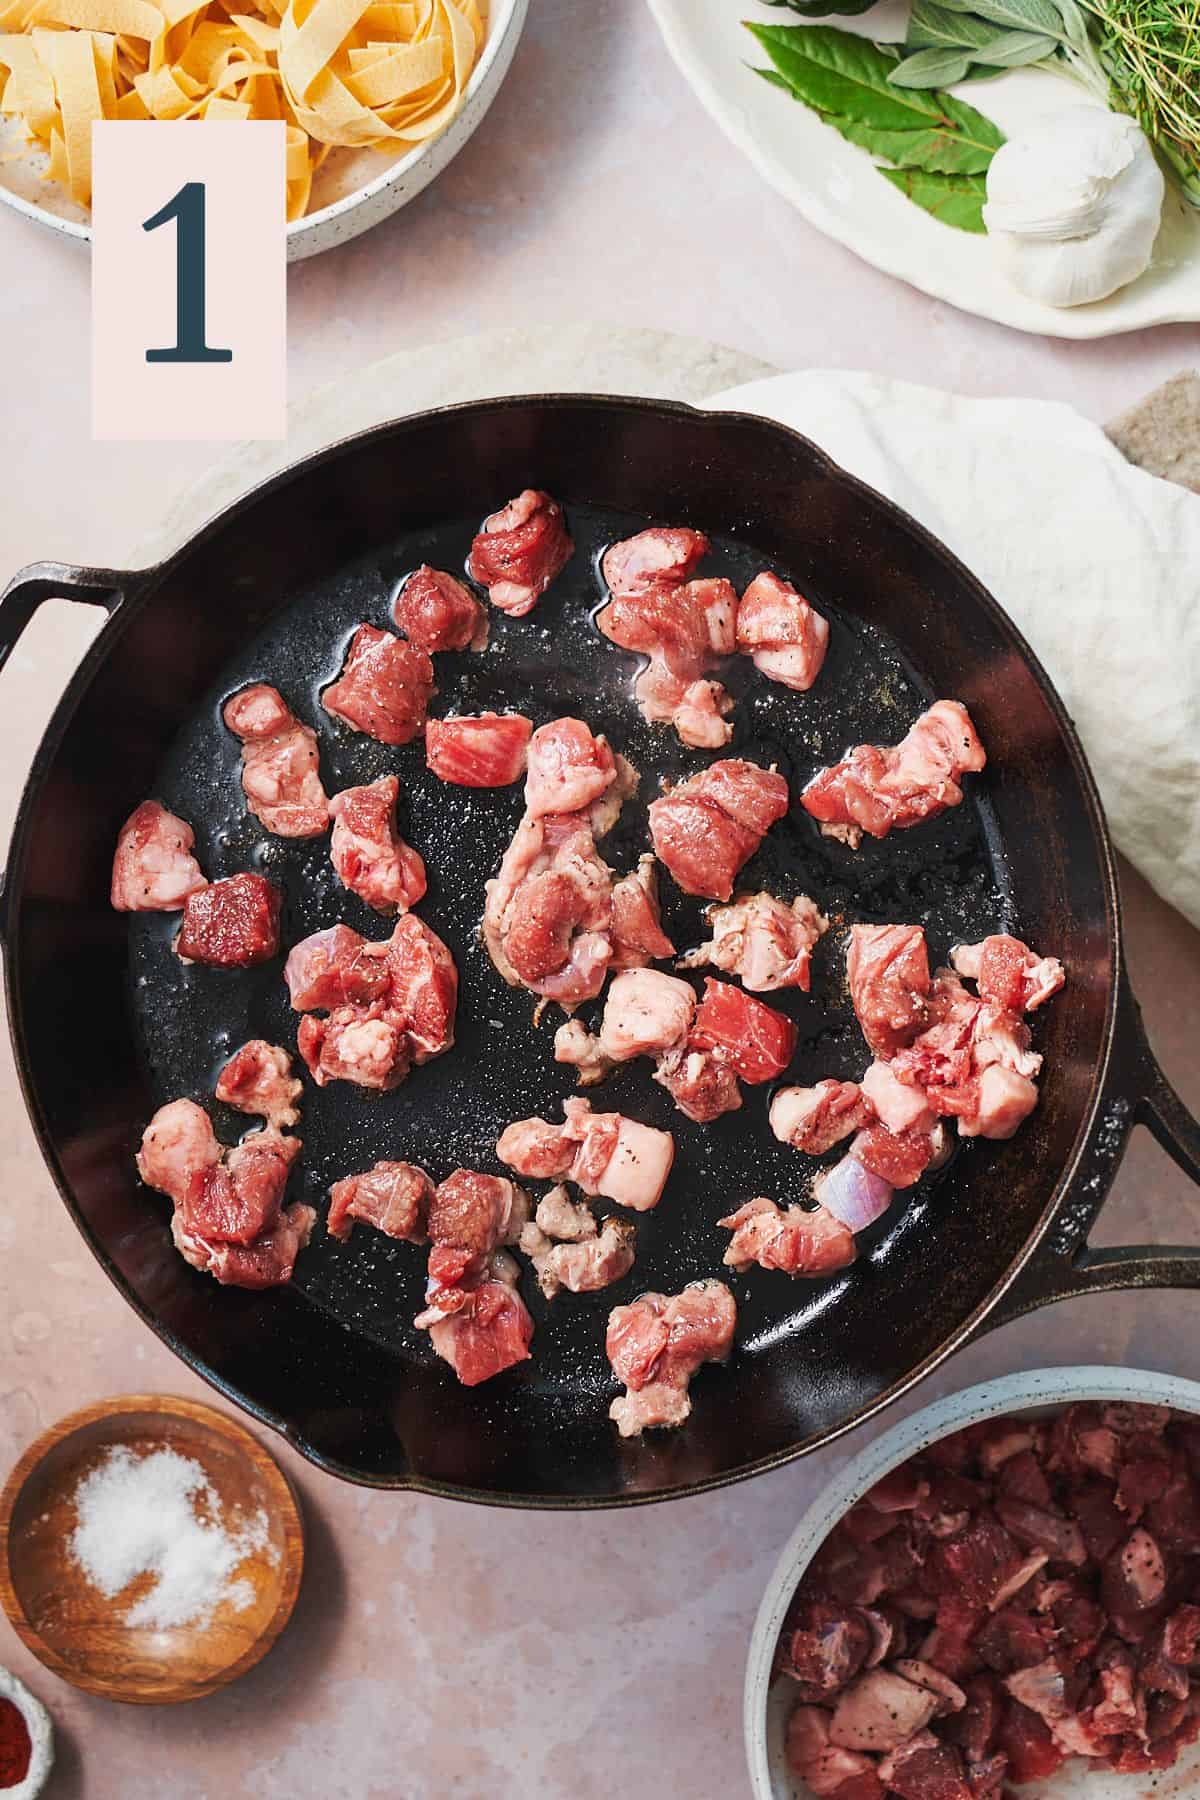 Raw chunks of lamb meat in a cast iron skillet.